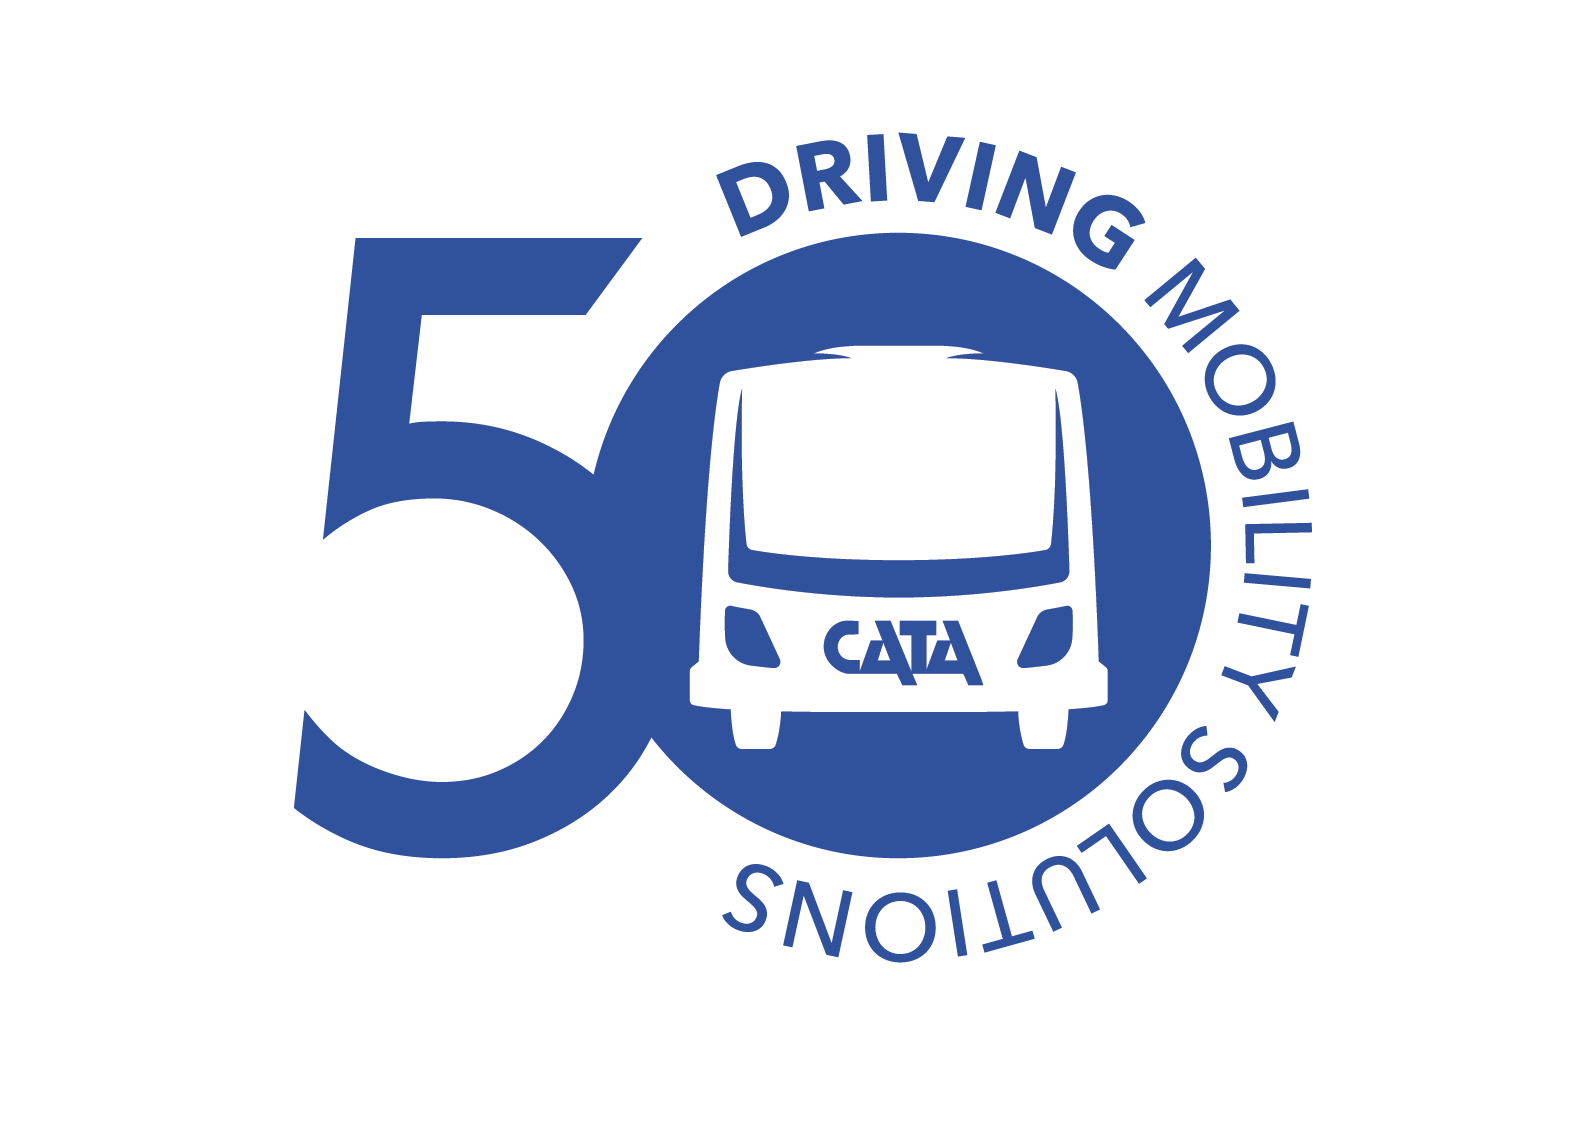 CATA 50 Year Logo in blue with tagline "Driving Mobility Solutions"